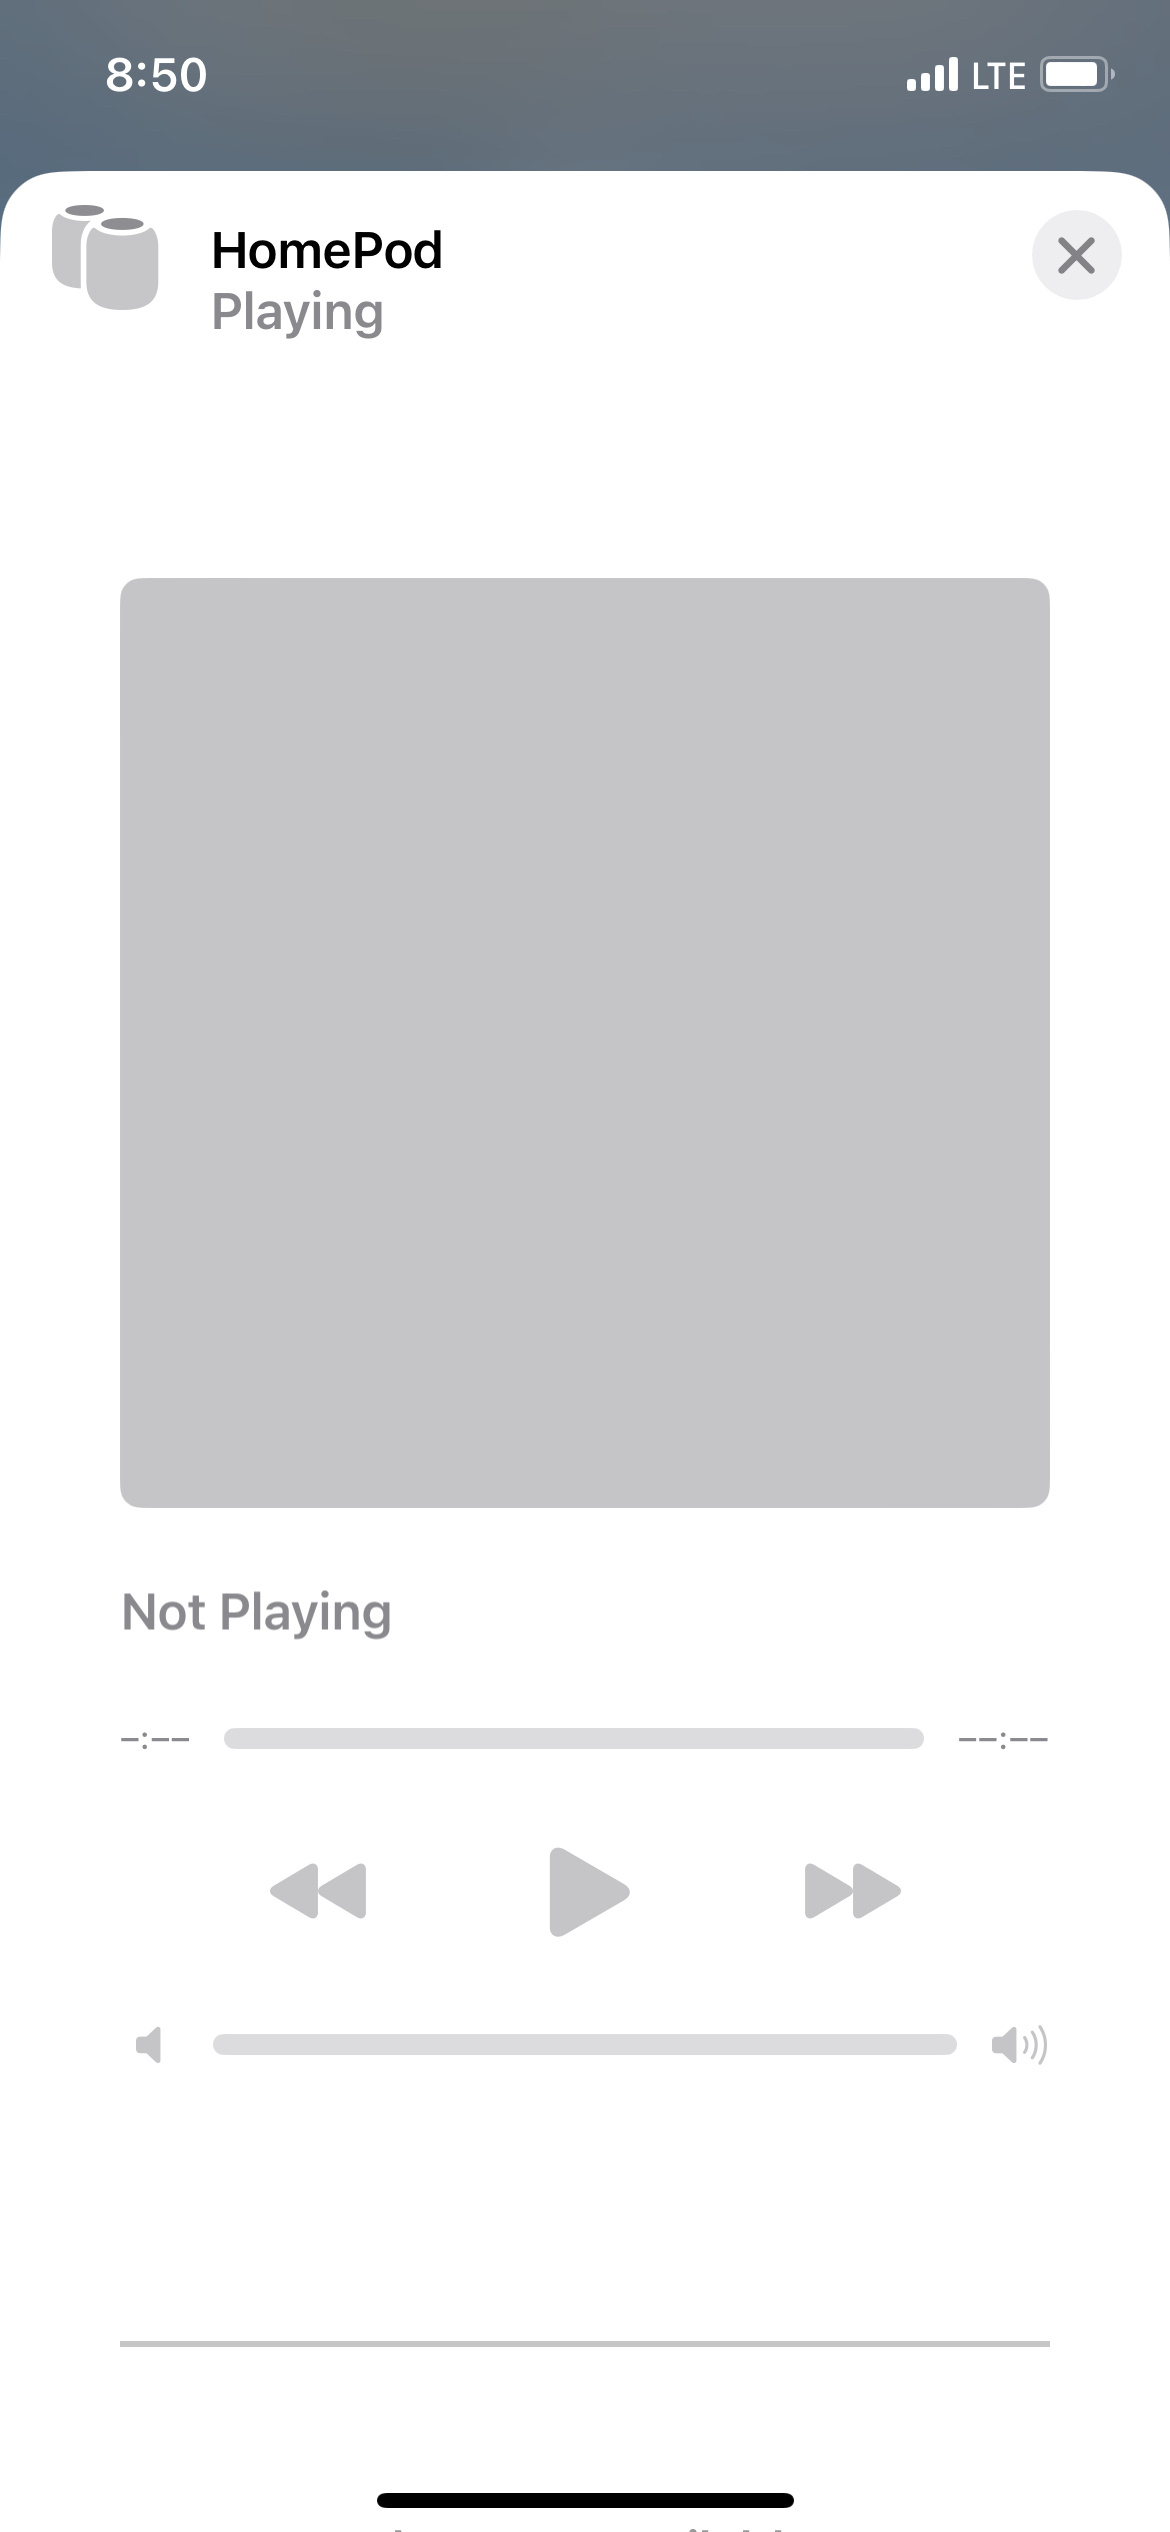 A screenshot from the Home app on iPhone showing the HomePod detail sheet. The subtitle to the sheet says, “Playing” but the media transport controls below are blank and an informational message says, “Not playing.”